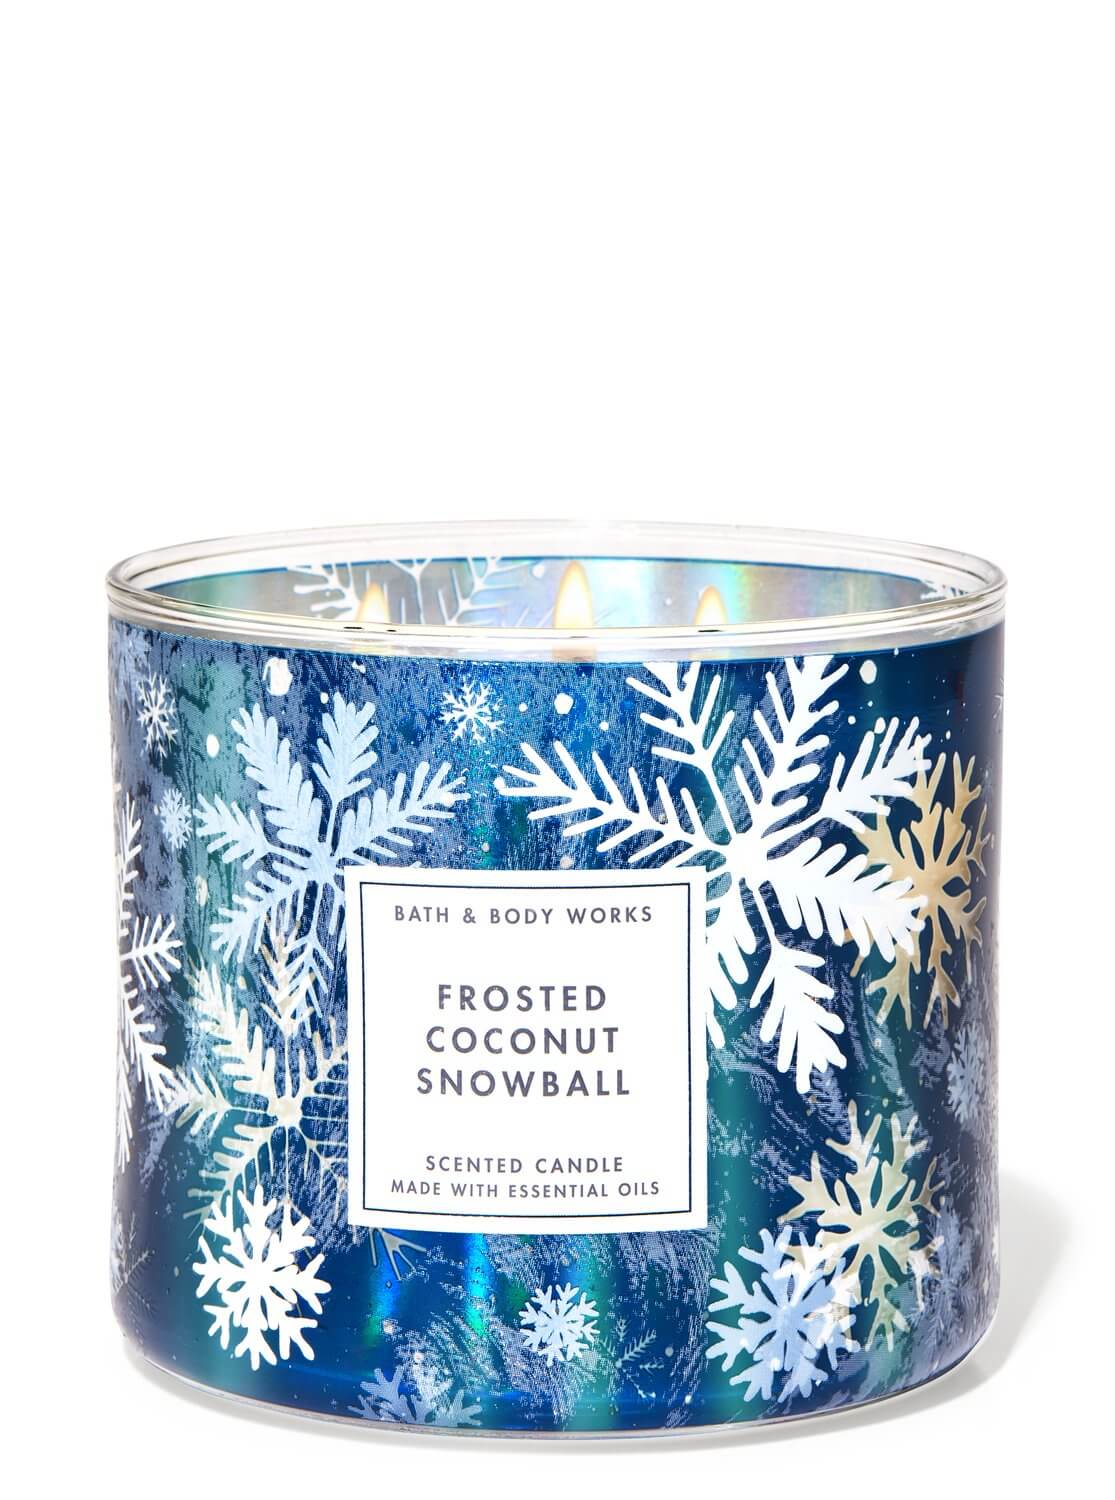 Bath & Body Works Frosted Coconut Snowball 3 Wick Candle